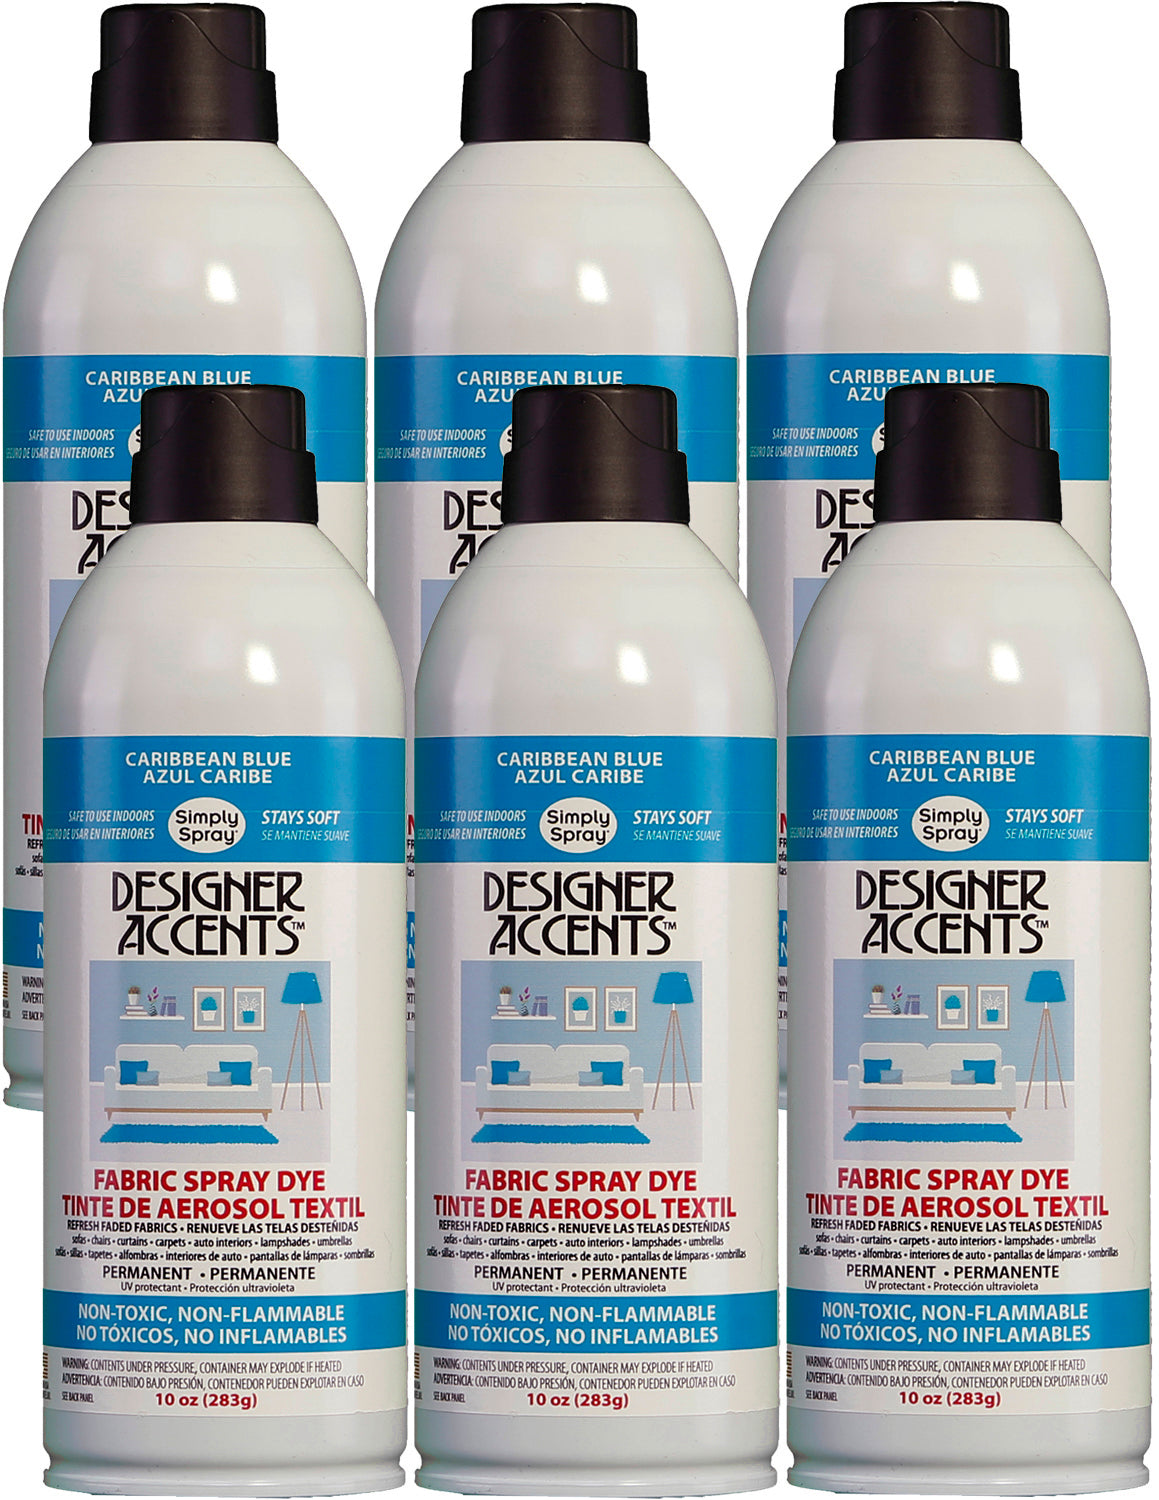 Designer Accents Fabric Paint Spray Dye by Simply Spray